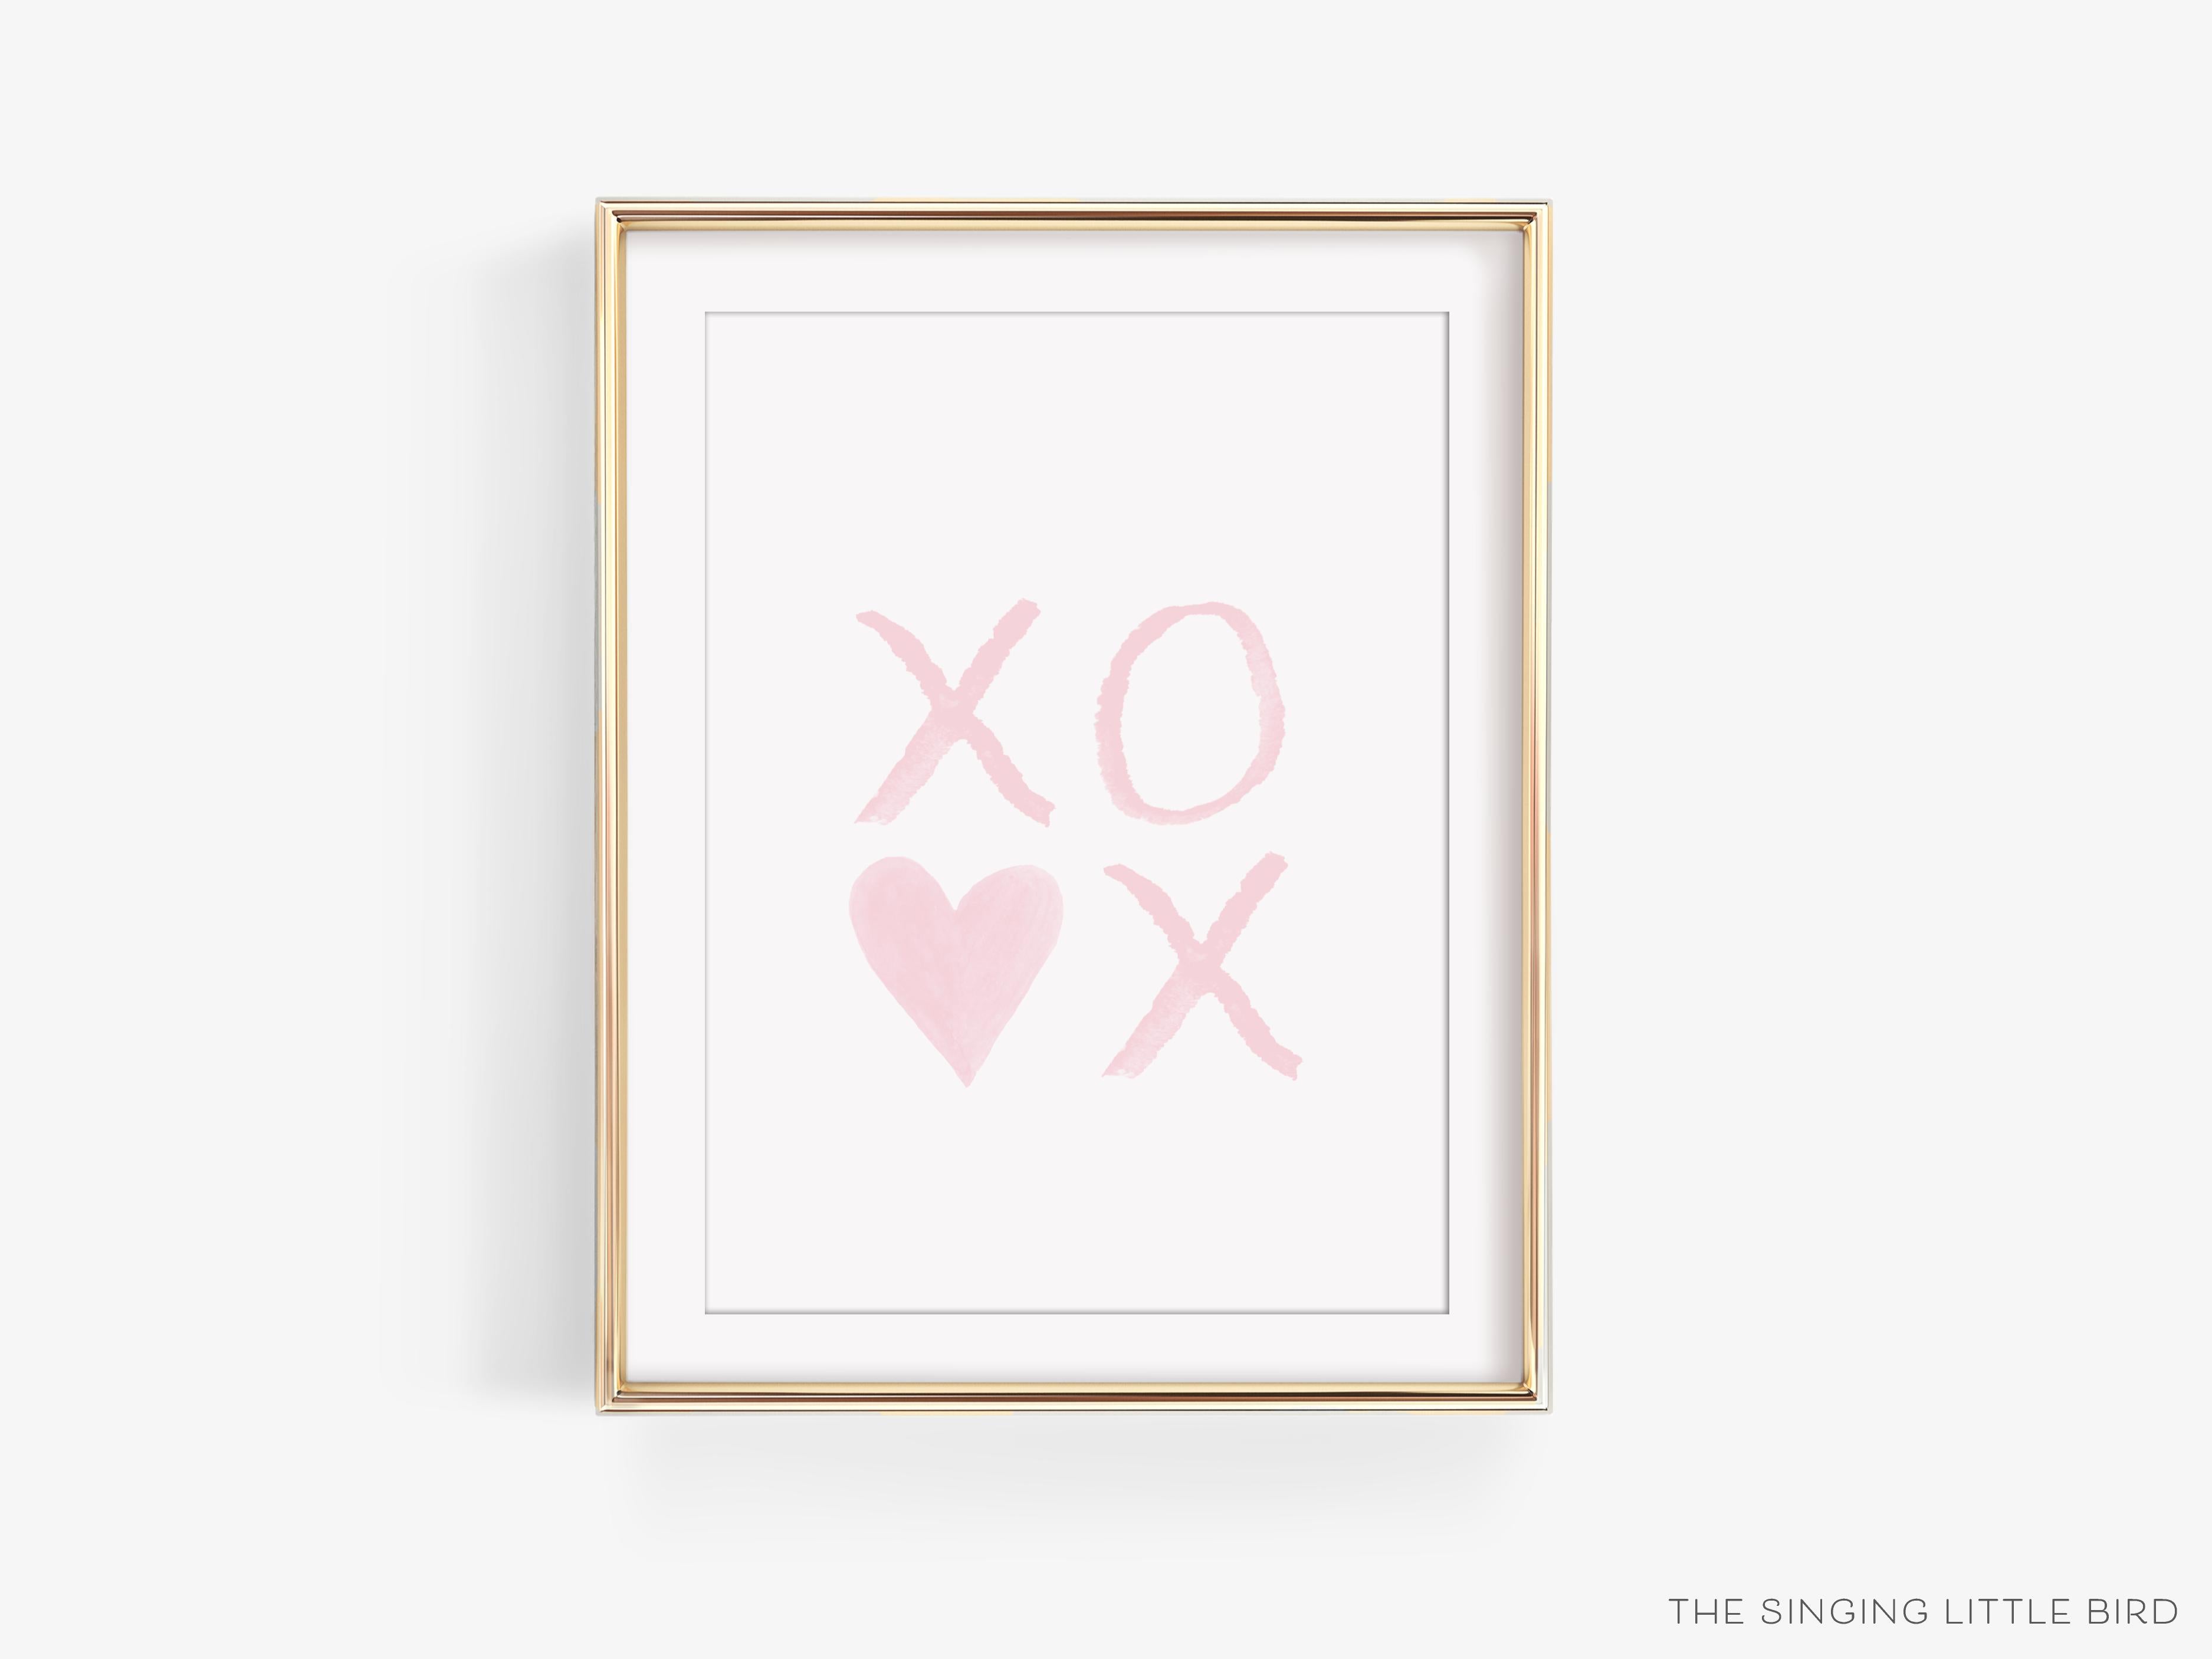 XOXO Pink with Heart Art Print-This watercolor art print features our hand-painted xo's and heart, printed in the USA on 120lb high quality art paper. This makes a great gift or wall decor for the hugs and kisses lover in your life.-The Singing Little Bird